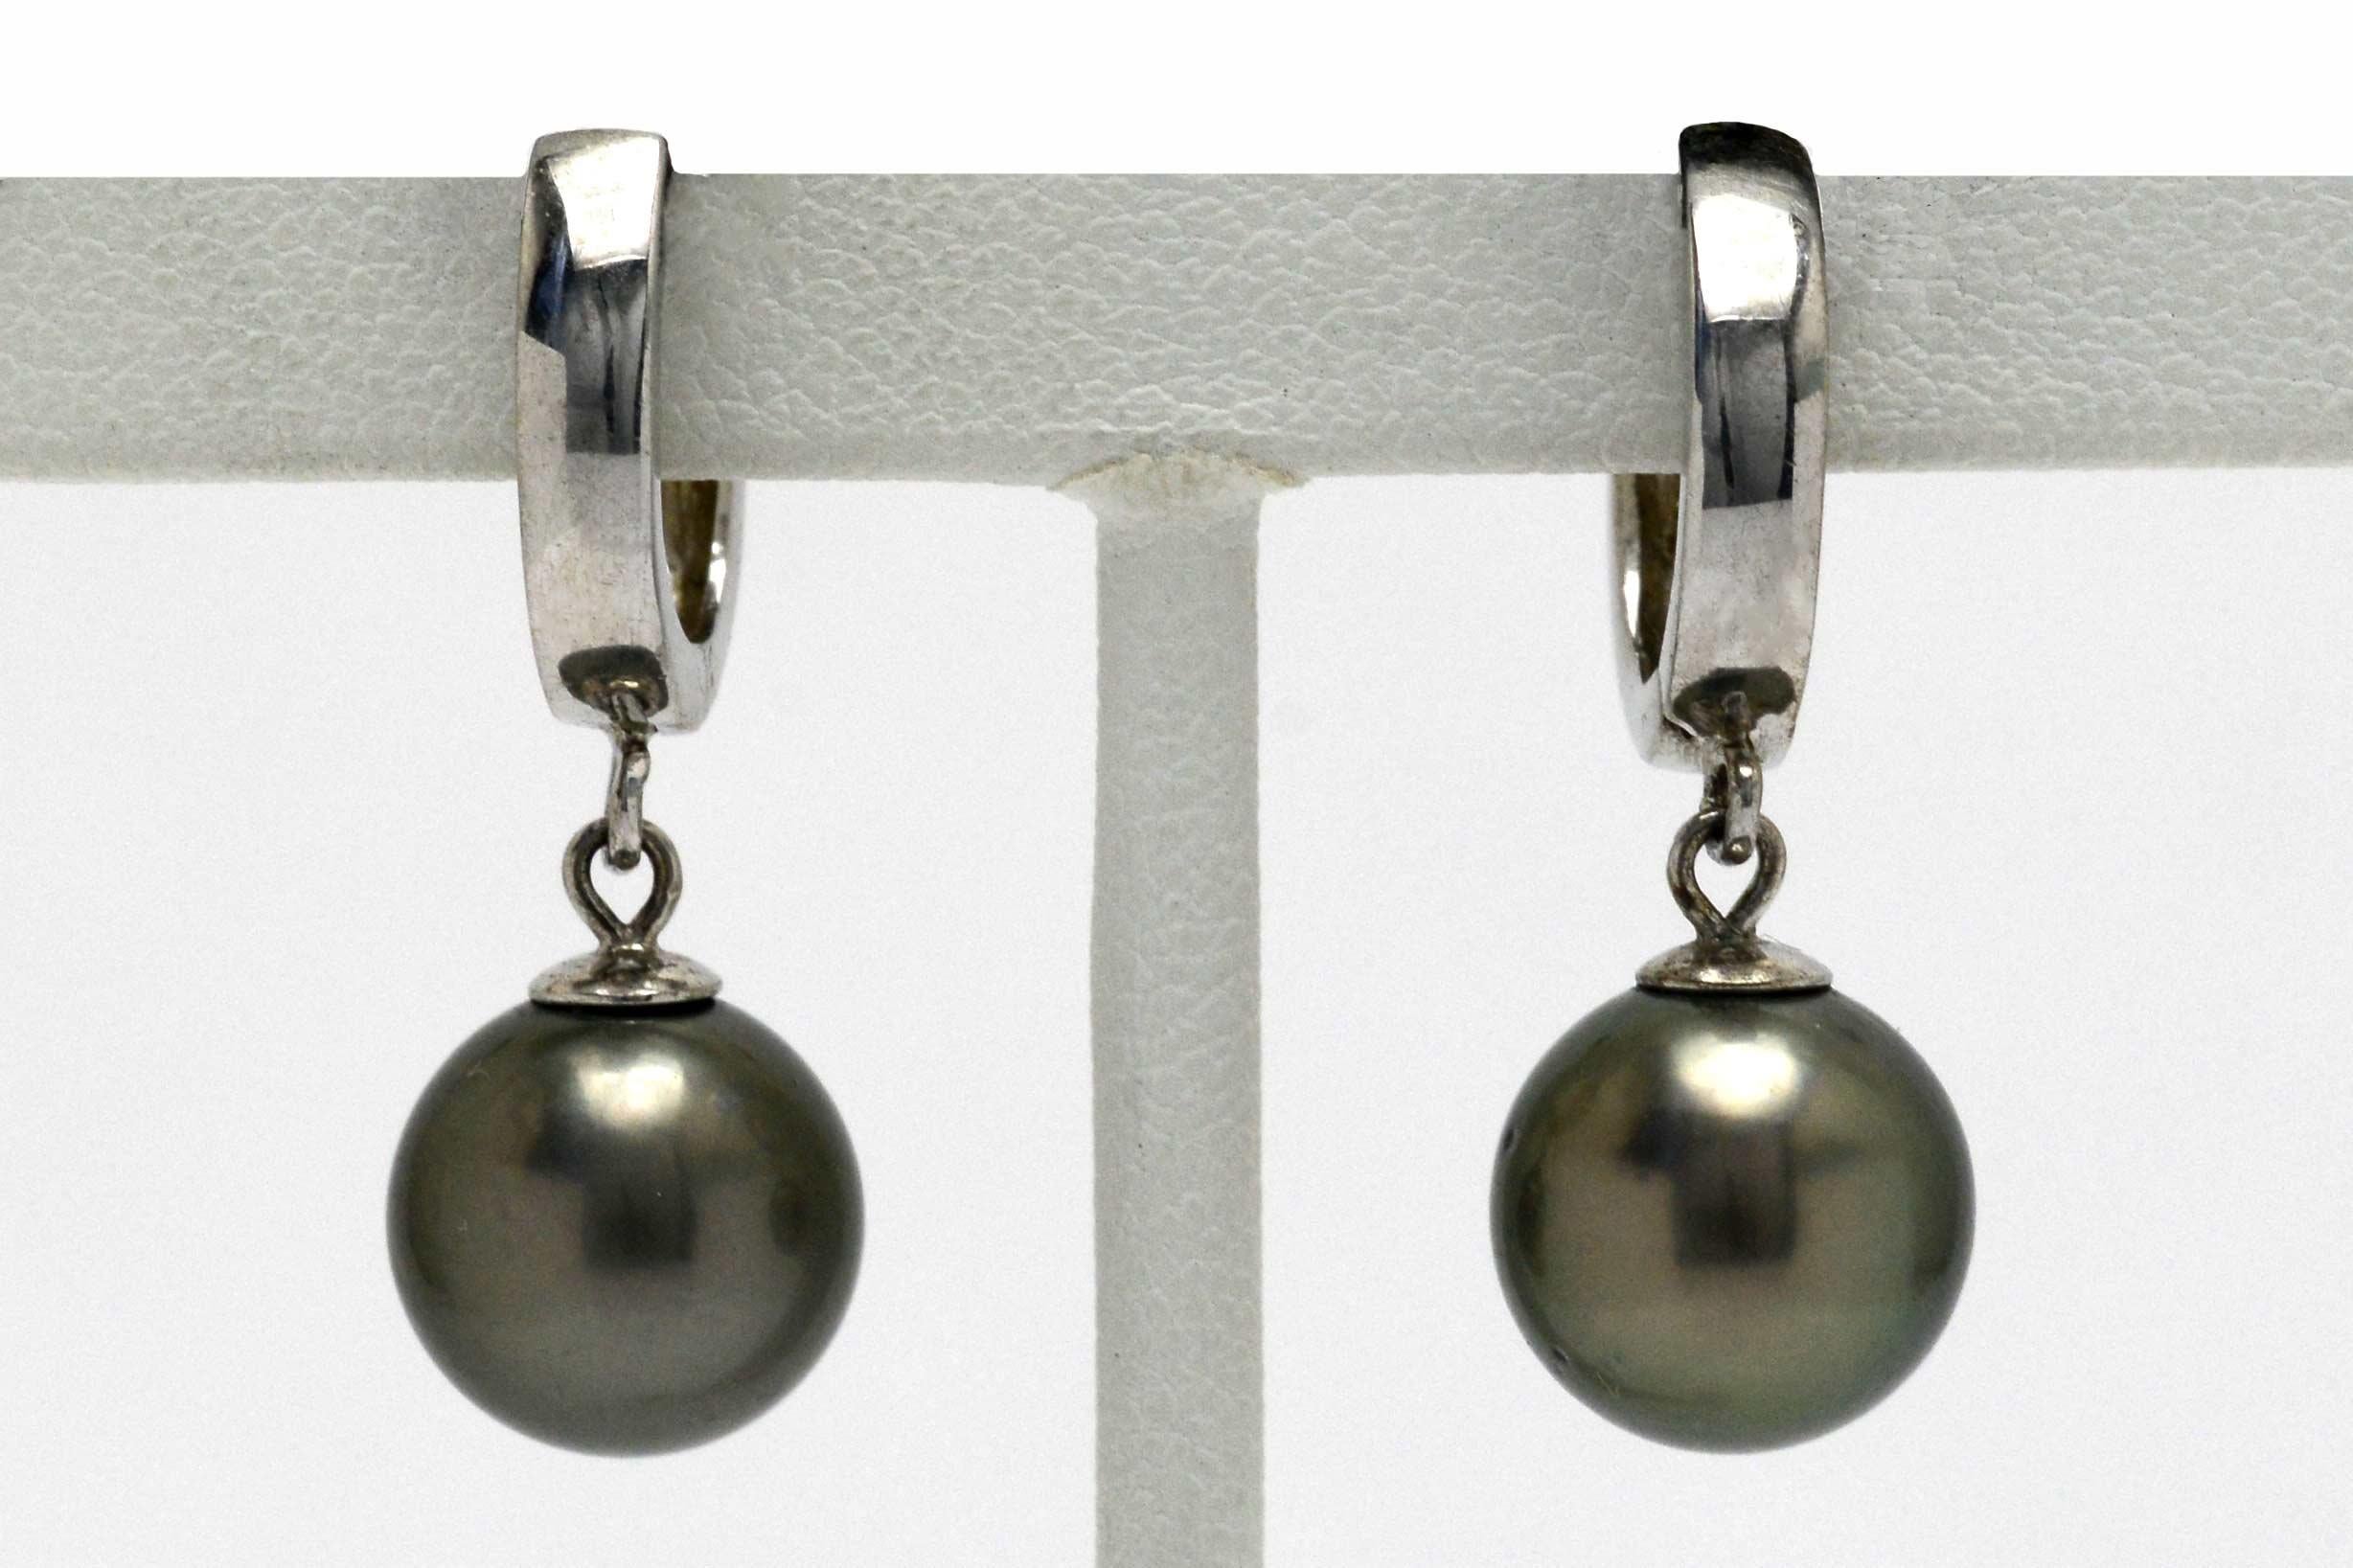 A wonderful pair of Black Tahitian Pearl Dangle Earrings in a desirable large, 10mm size. With the most mesmerizing silvery gray-black overtone and shimmering luster, these eminently wearable drop earrings sway seductively and capture the slightest